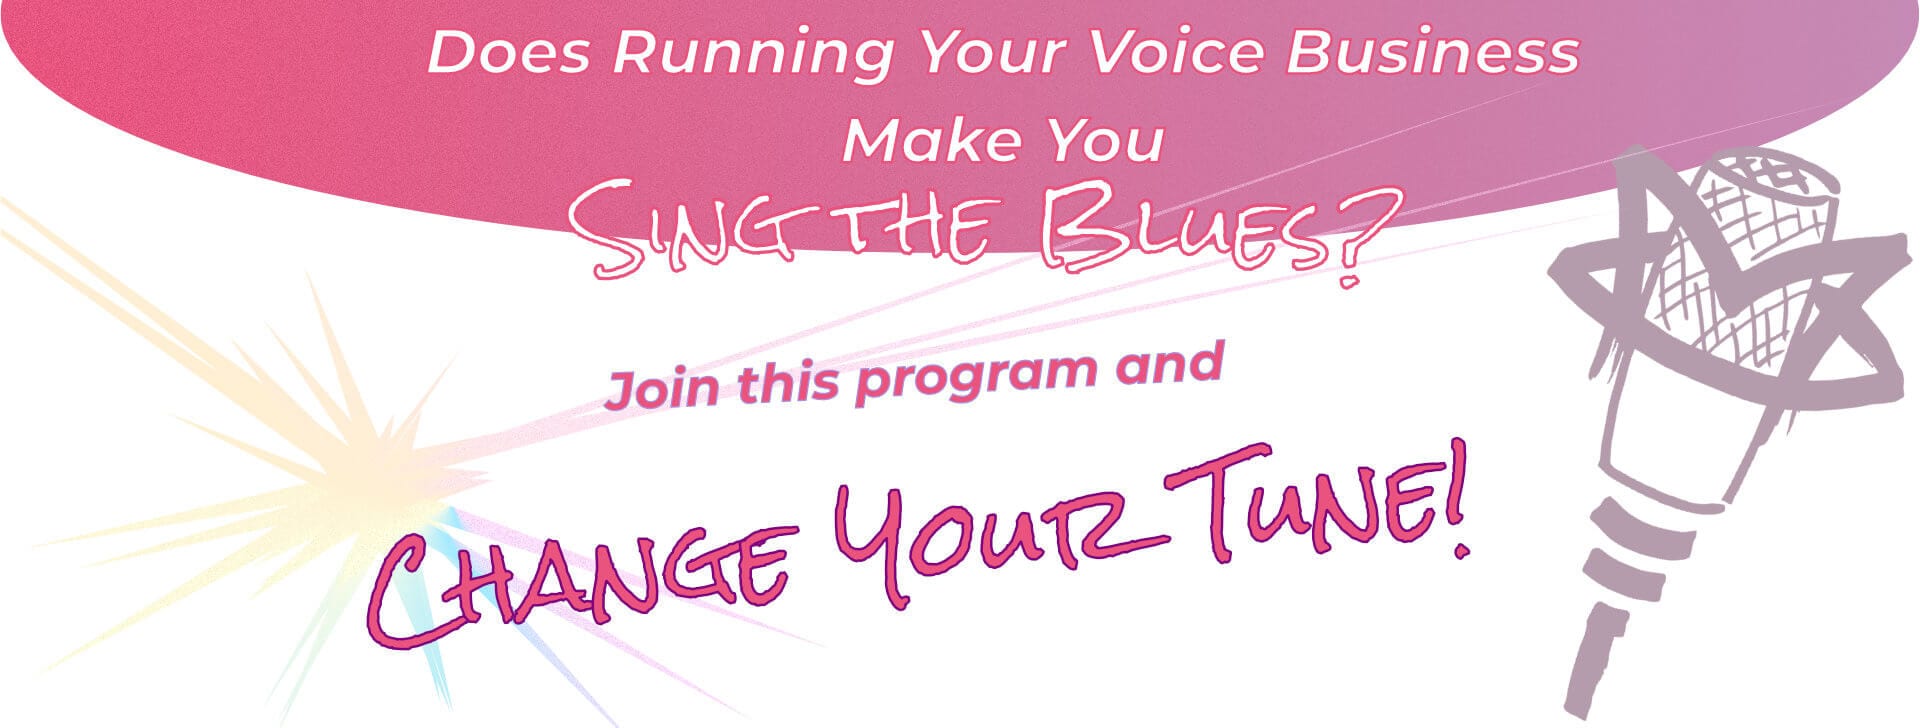 2019 H2R banner (mobile) faithculturekiss - Does running your voice studio make you sing the blues? Join this program and change your tune!